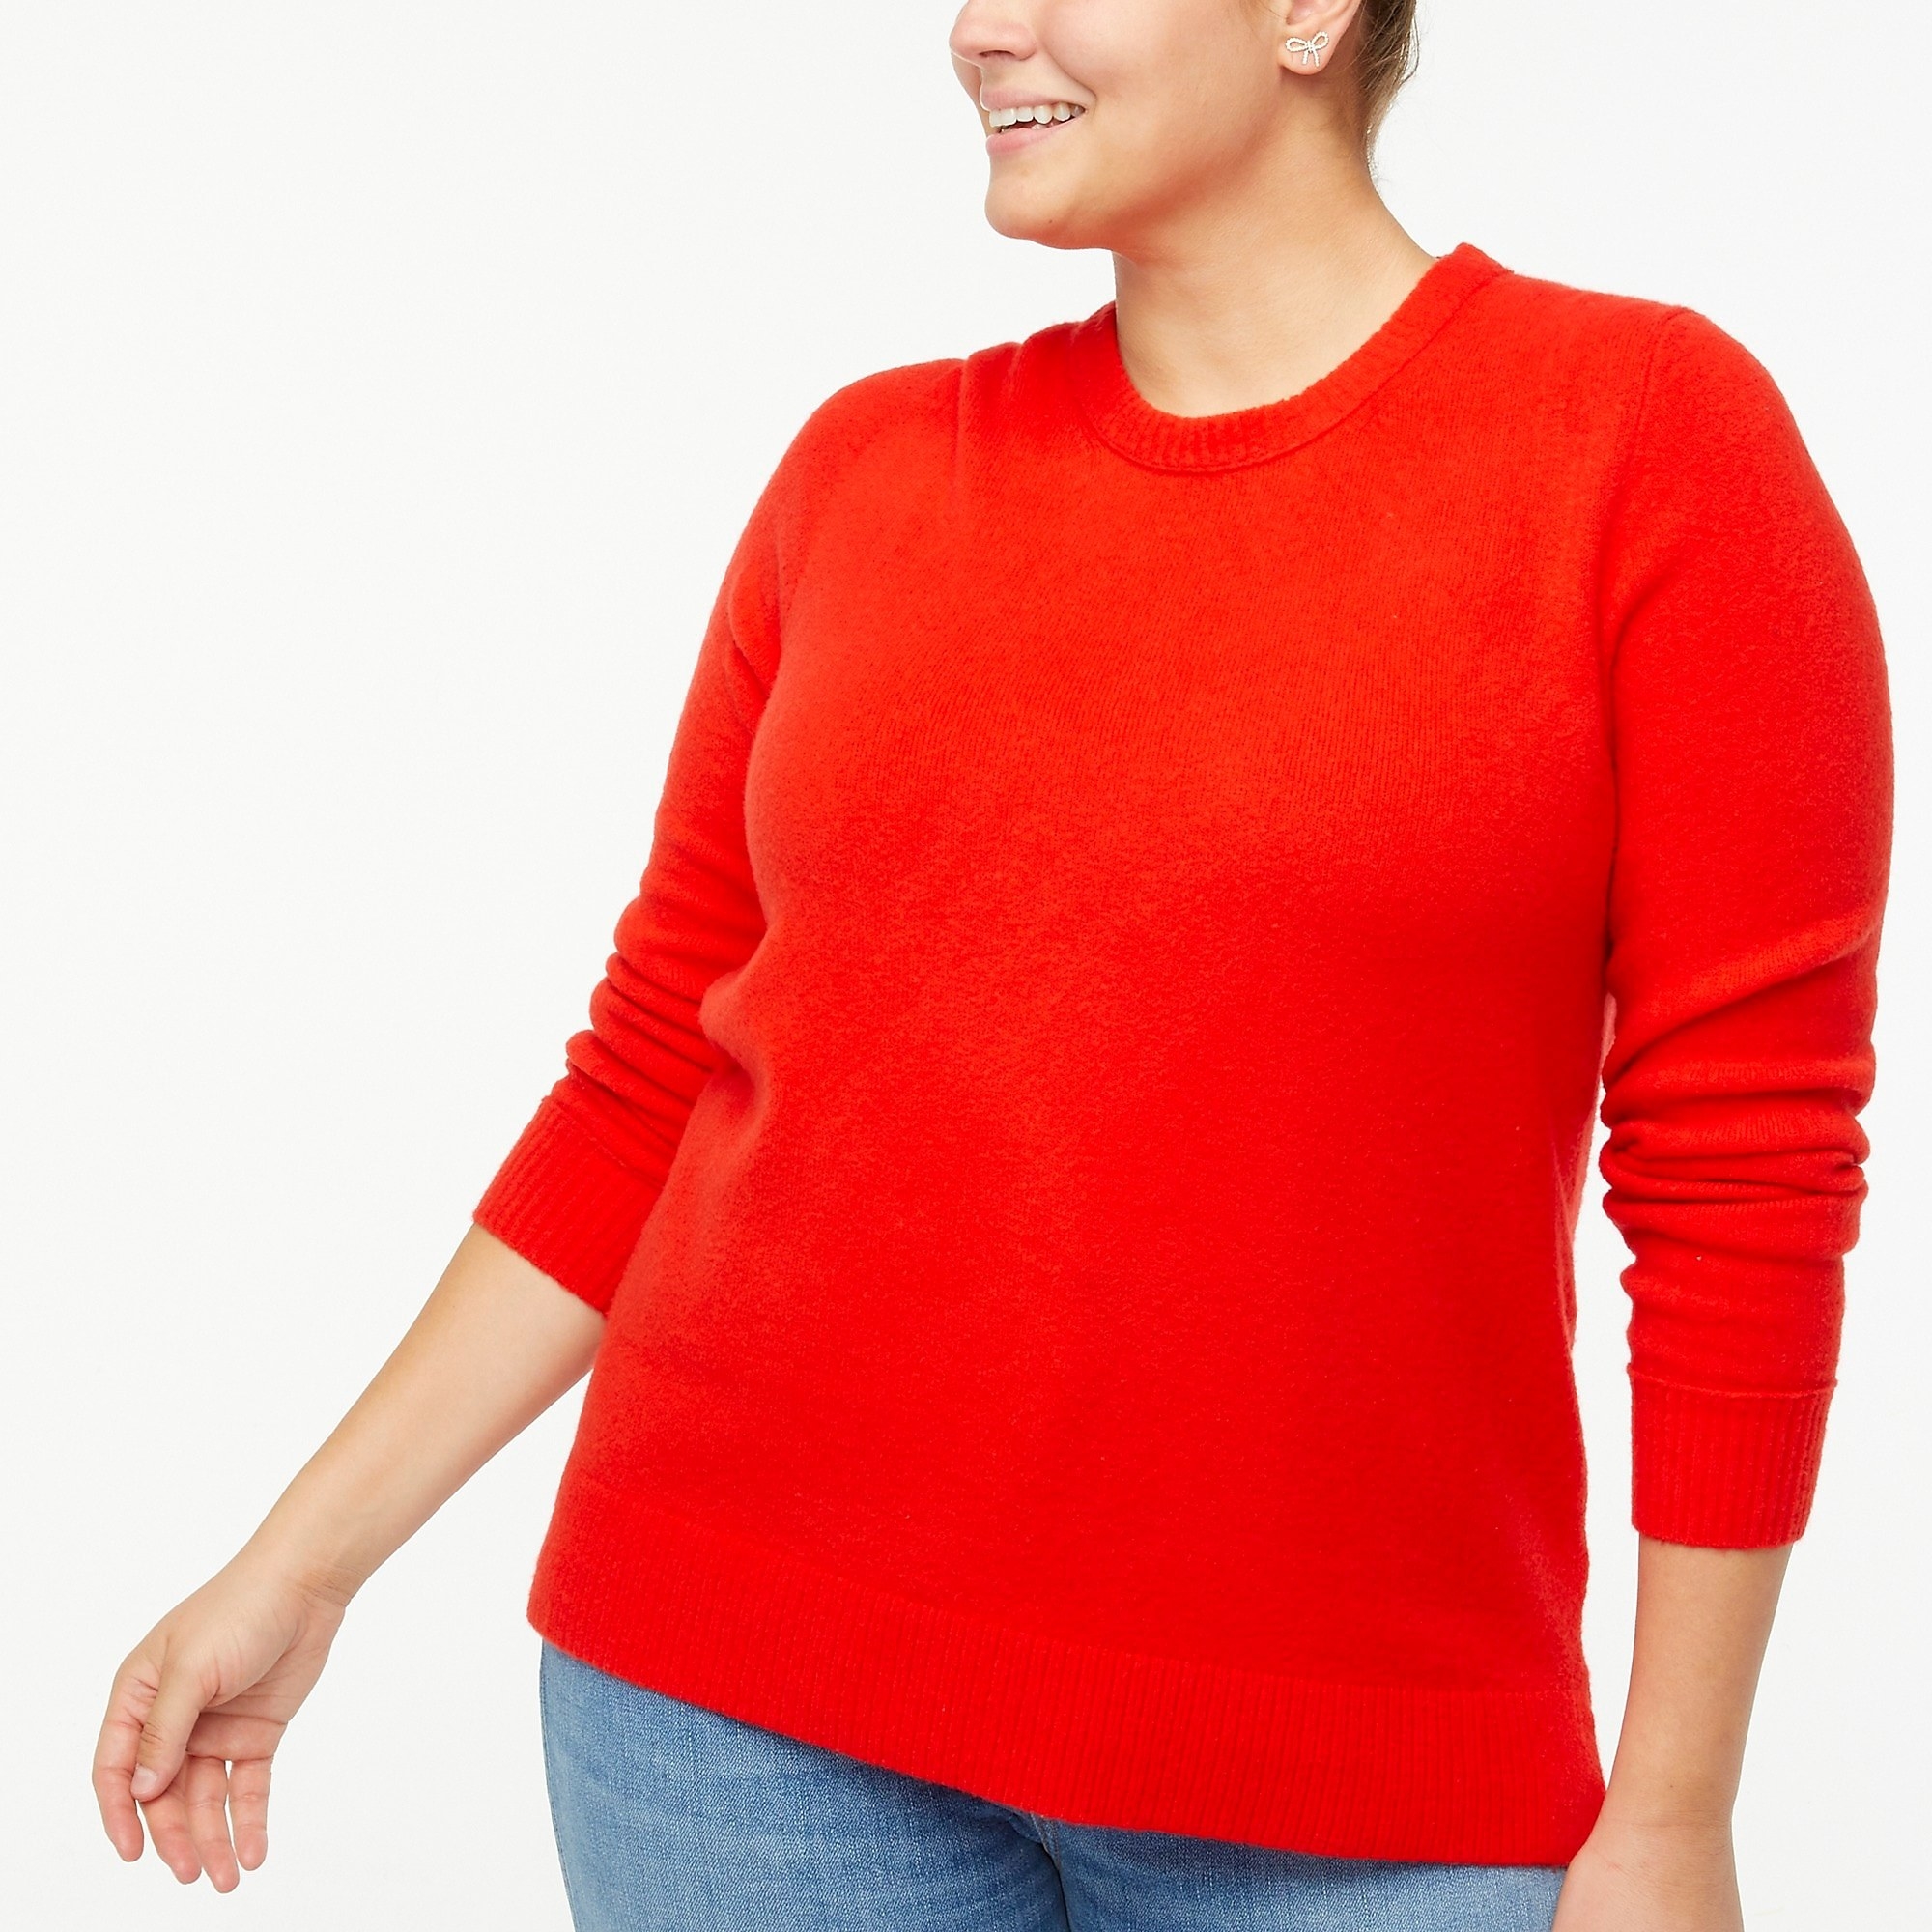 Model wearing red sweater with blue jeans